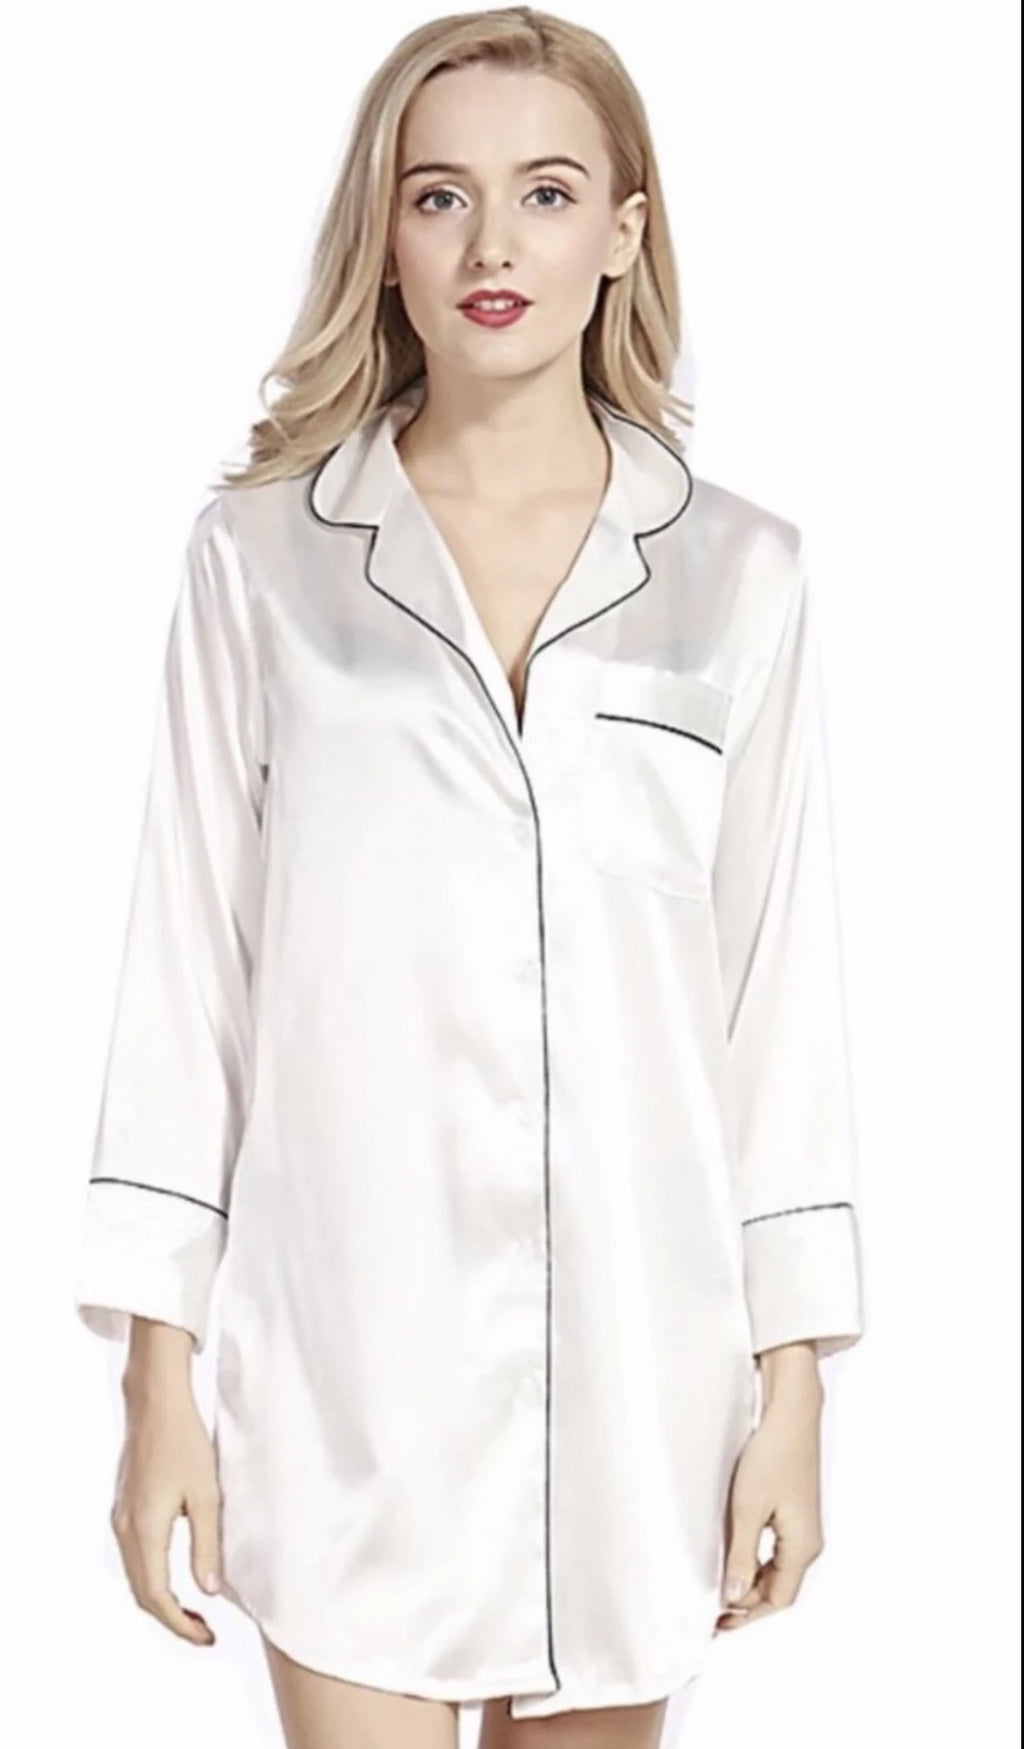 Nicole 100% Pure Mulberry Silk Classic Long Sleeve Button Down Nightgown